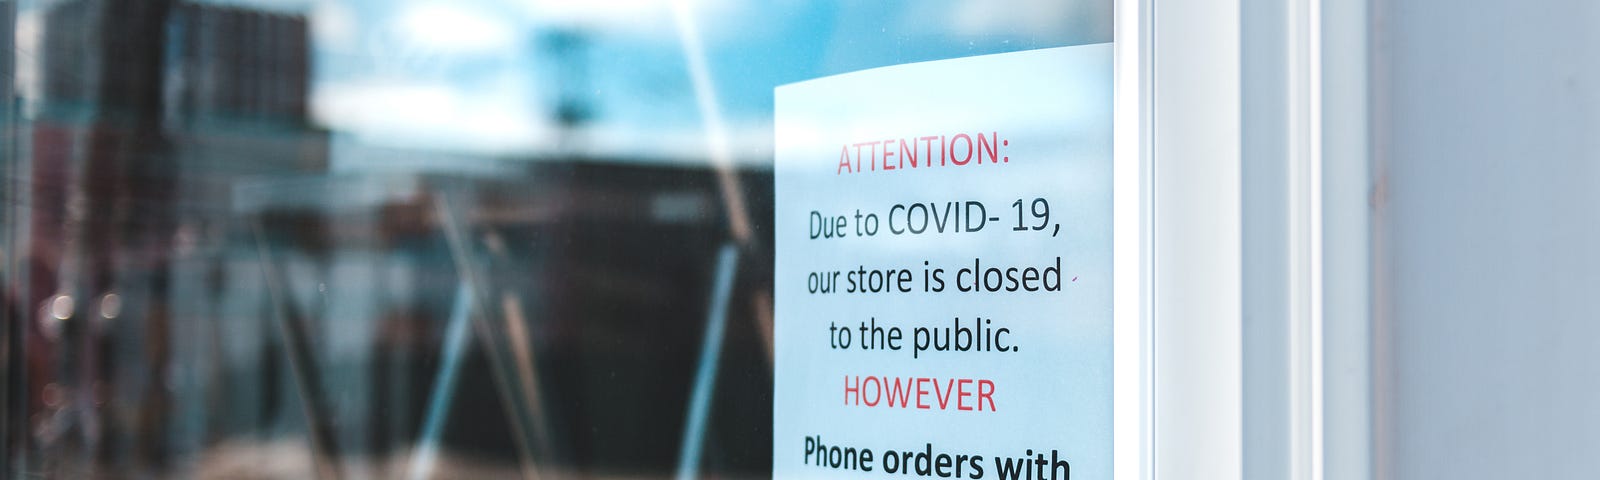 [Photo] Window with a sign announcing that due to COVID-10, they are closed to the public and offering curbside pickup.